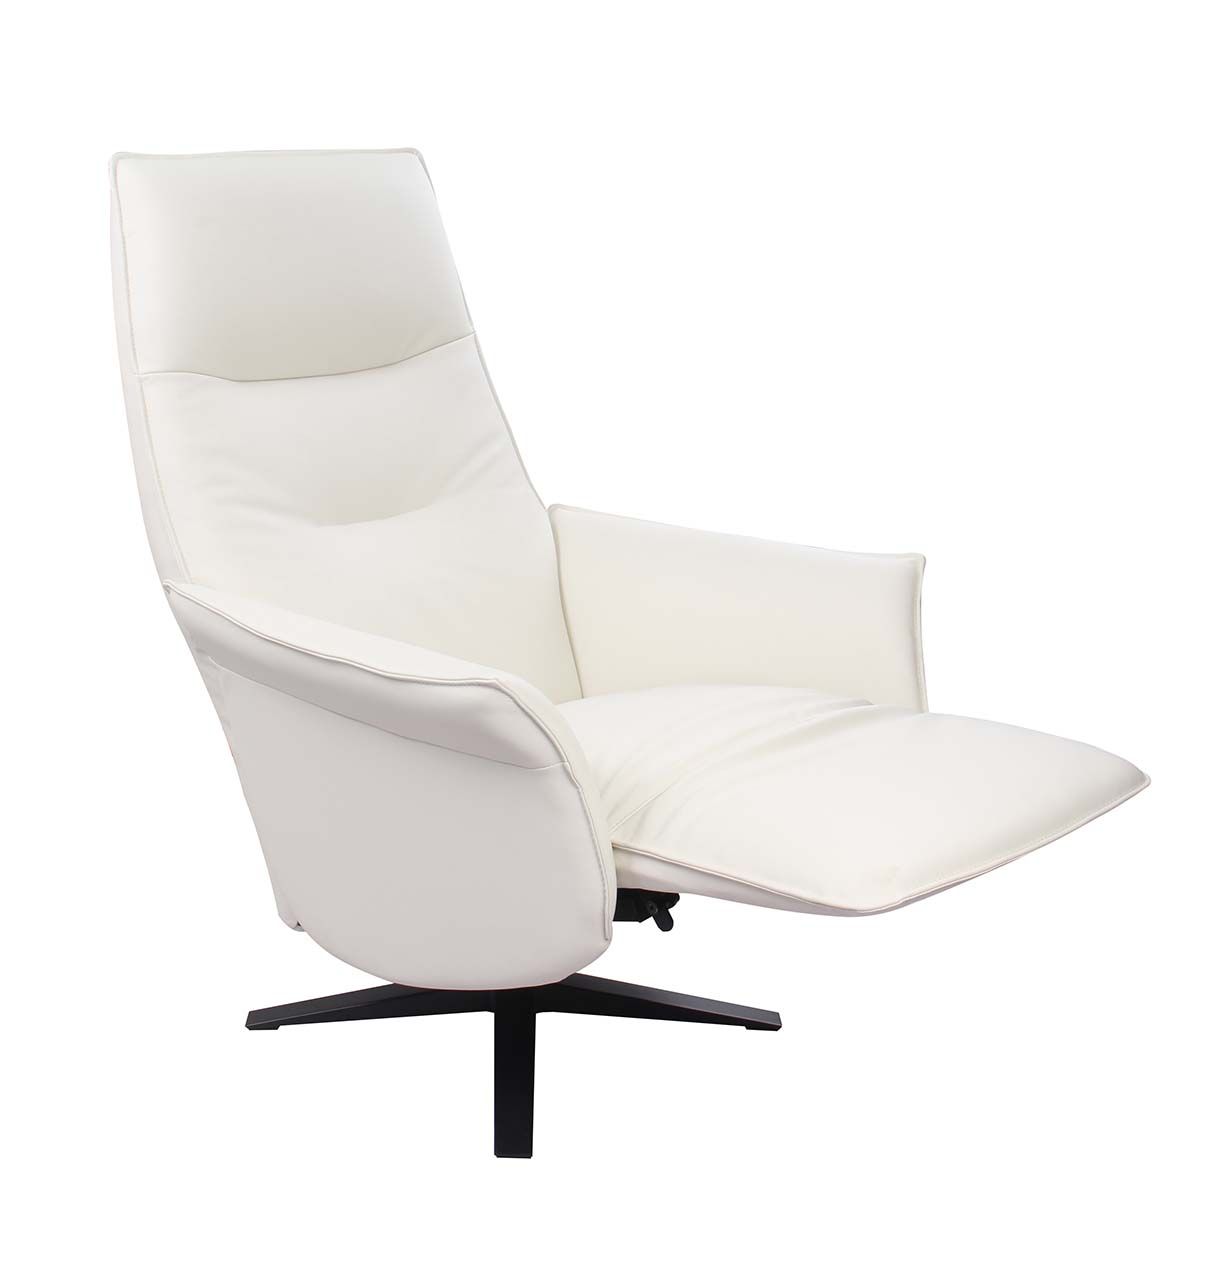 fauteuil-relaxation-design-cuir-blanc-confortable-saturne